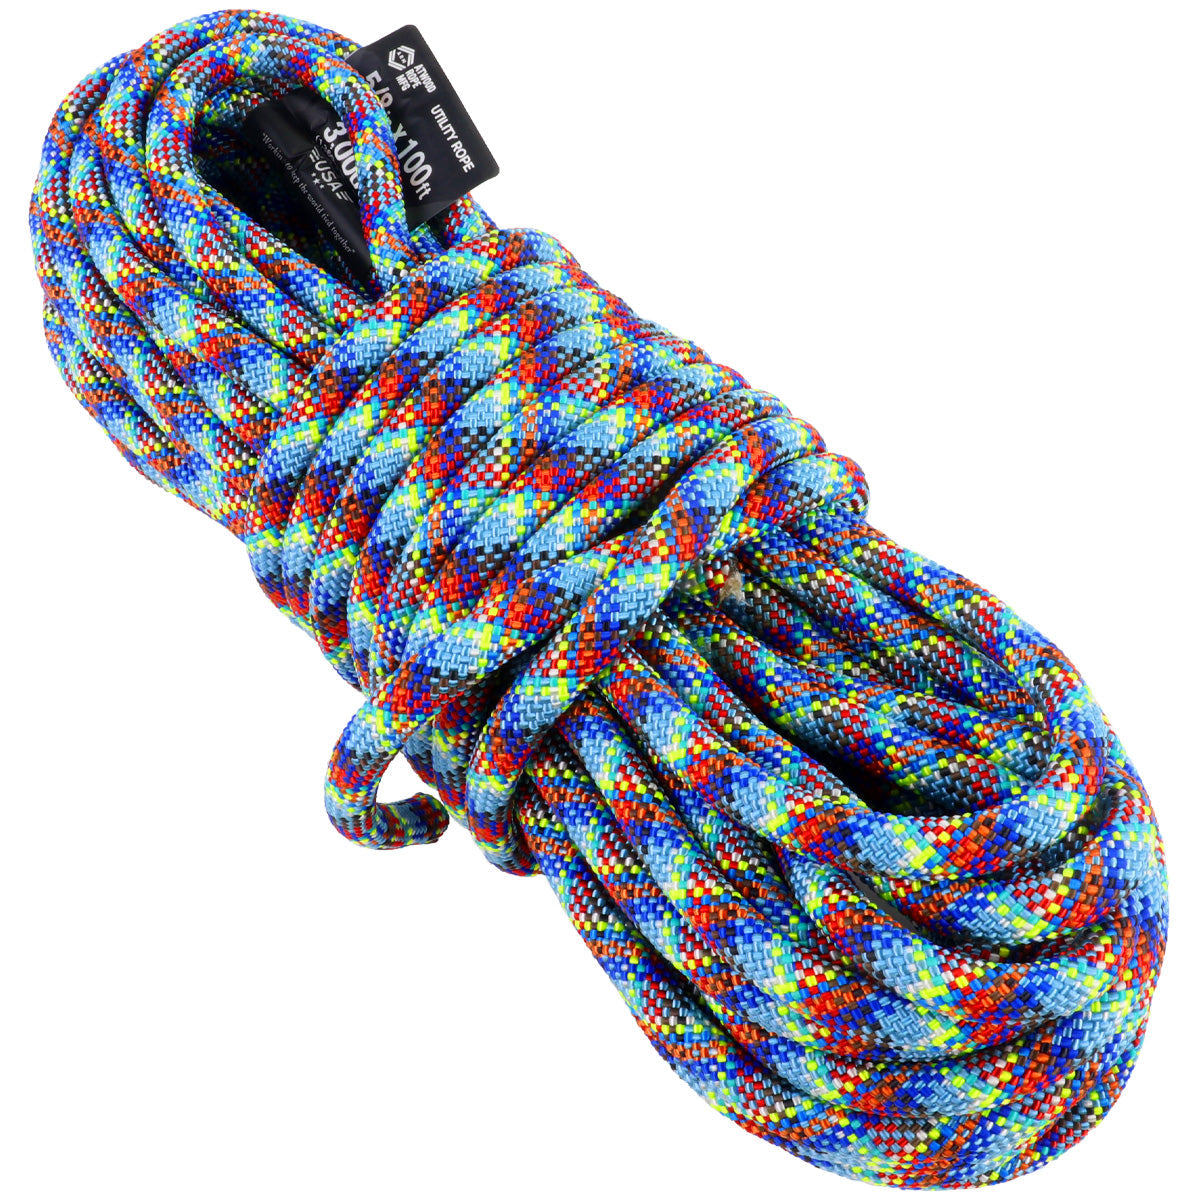 3/16inx100ft Utility Rope **VARIOUS COLORS**